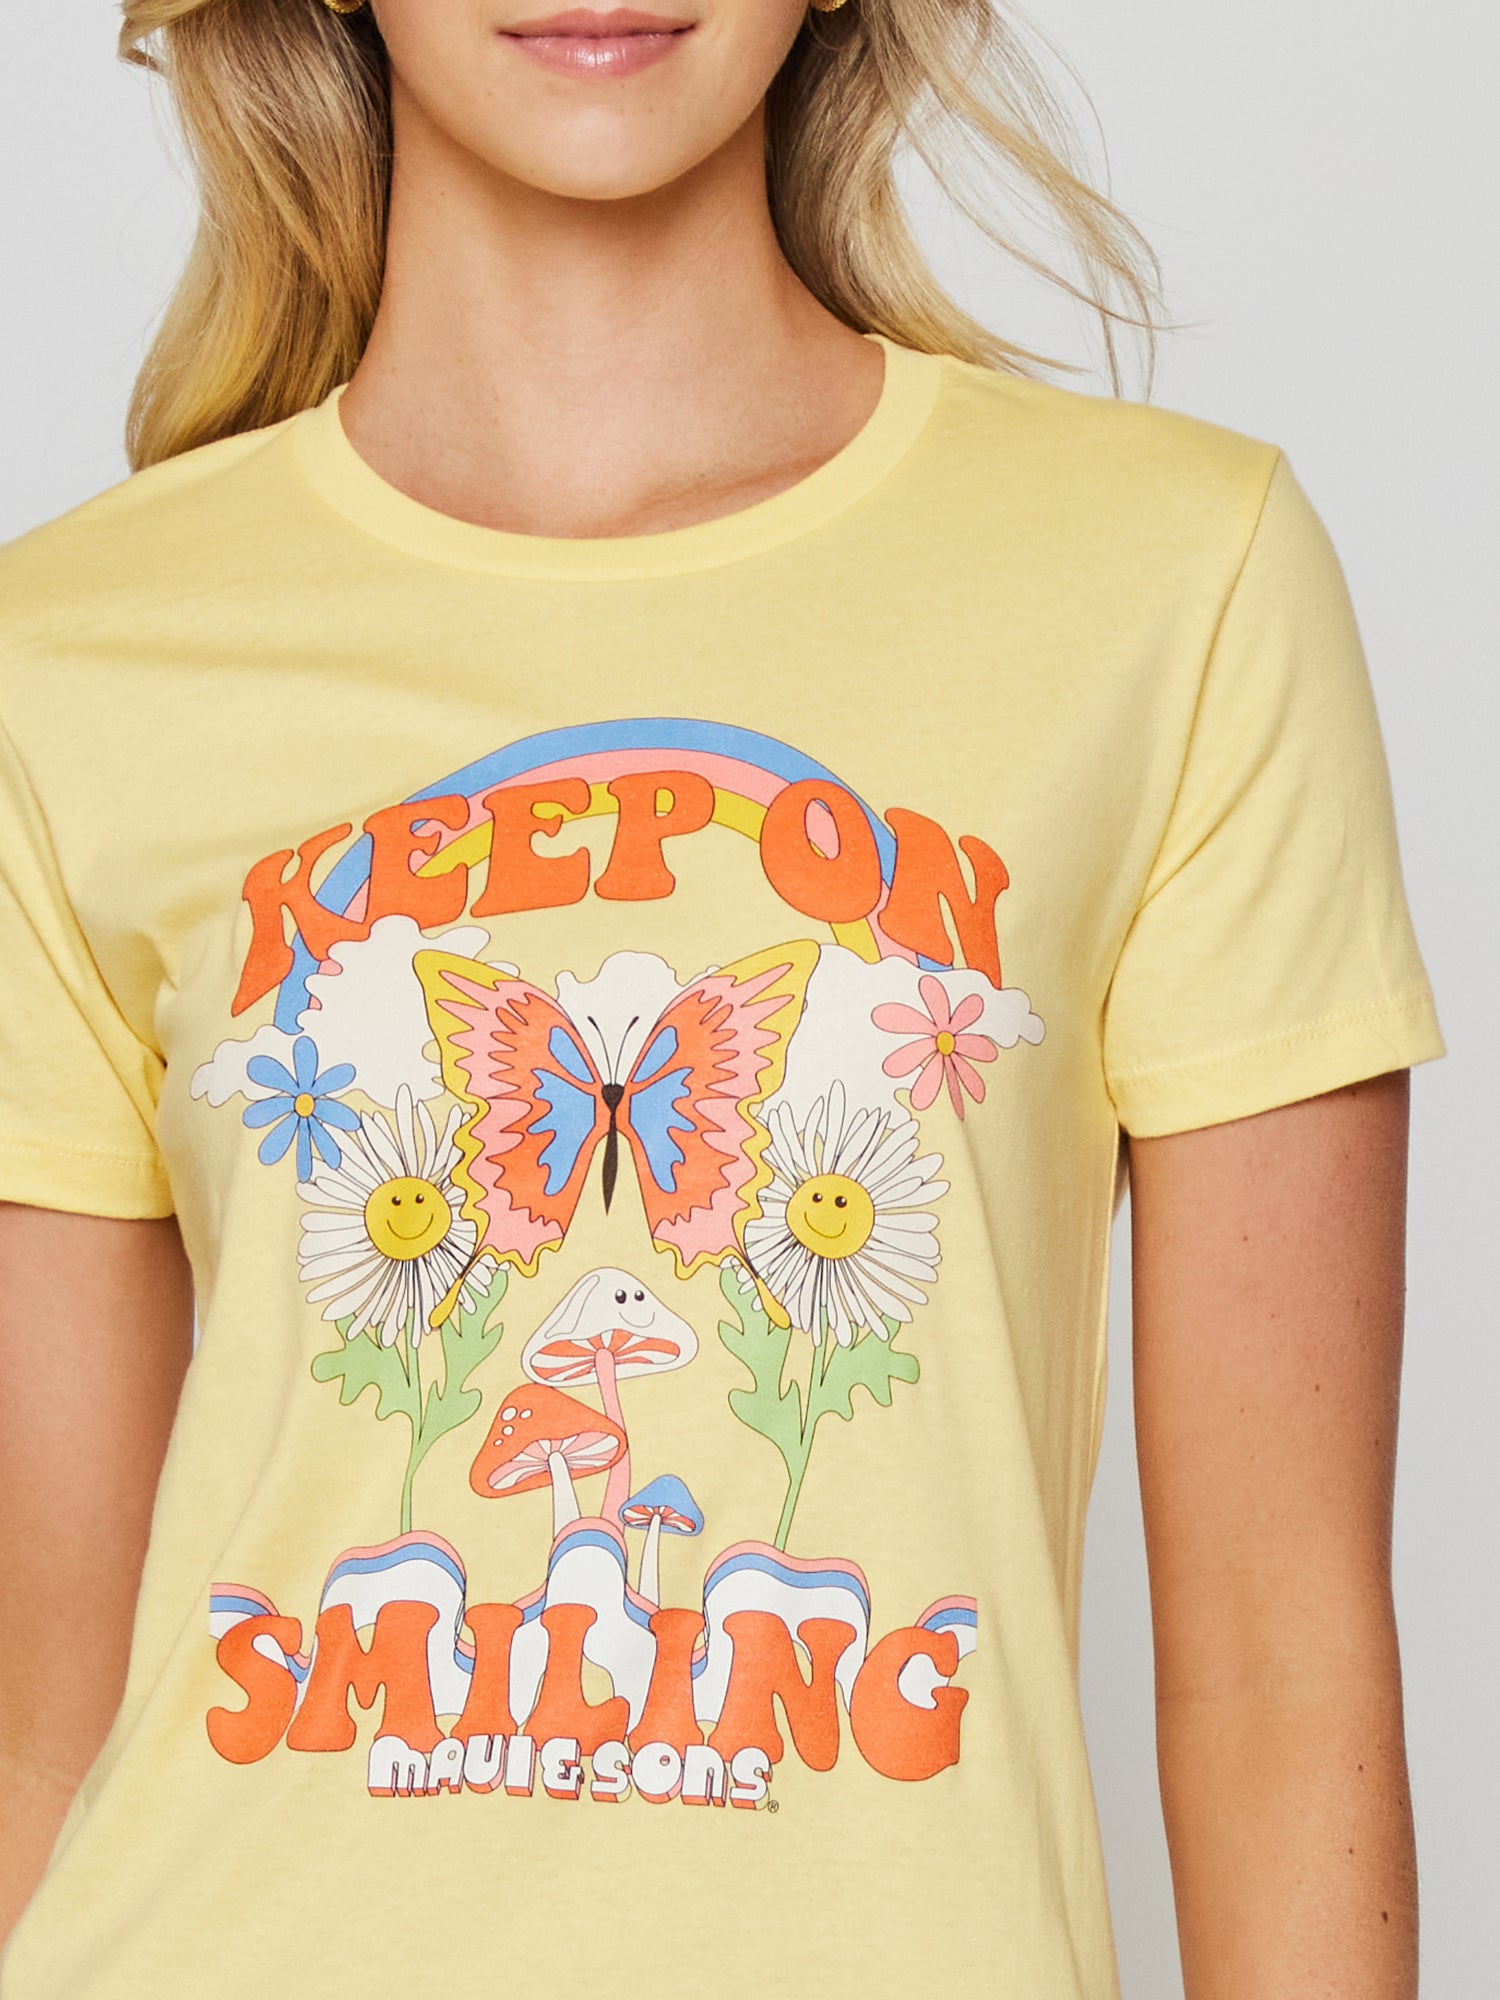 Keep on Smiling T-Shirt